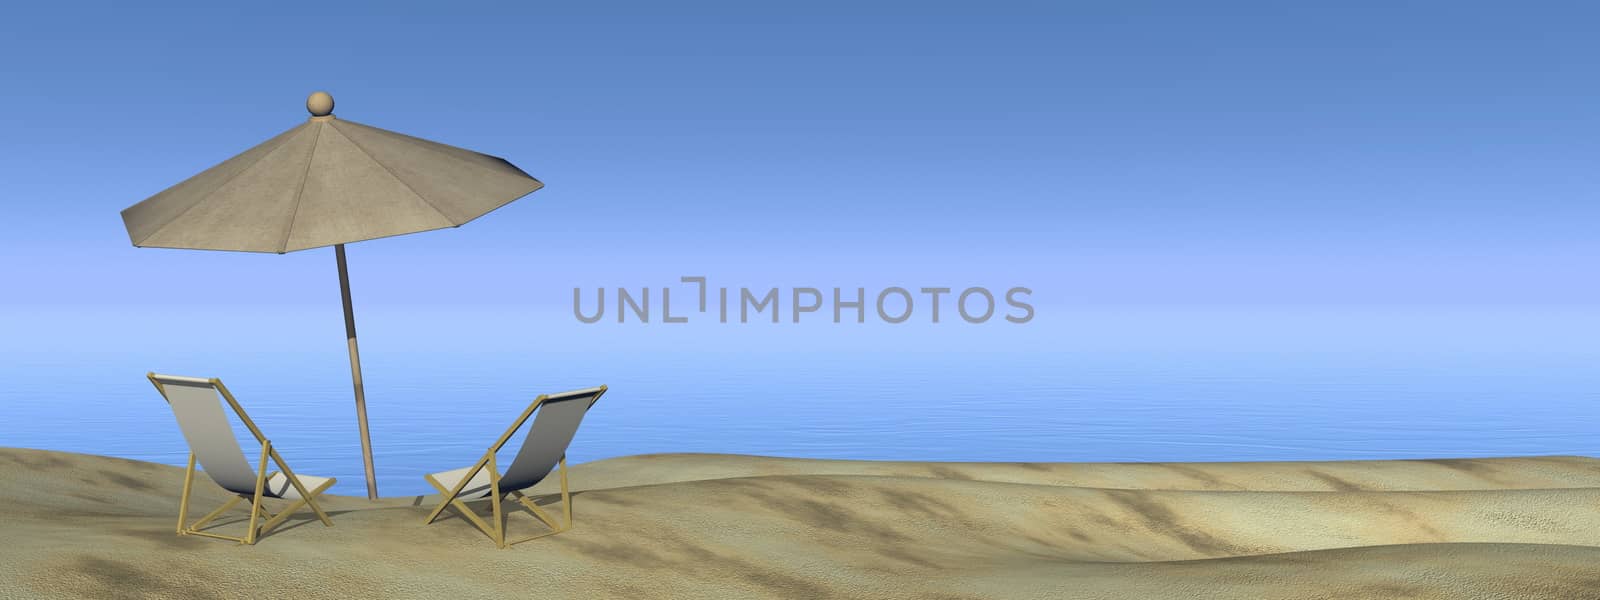 Two chairs under an umbrella at the beach by day - 3D render